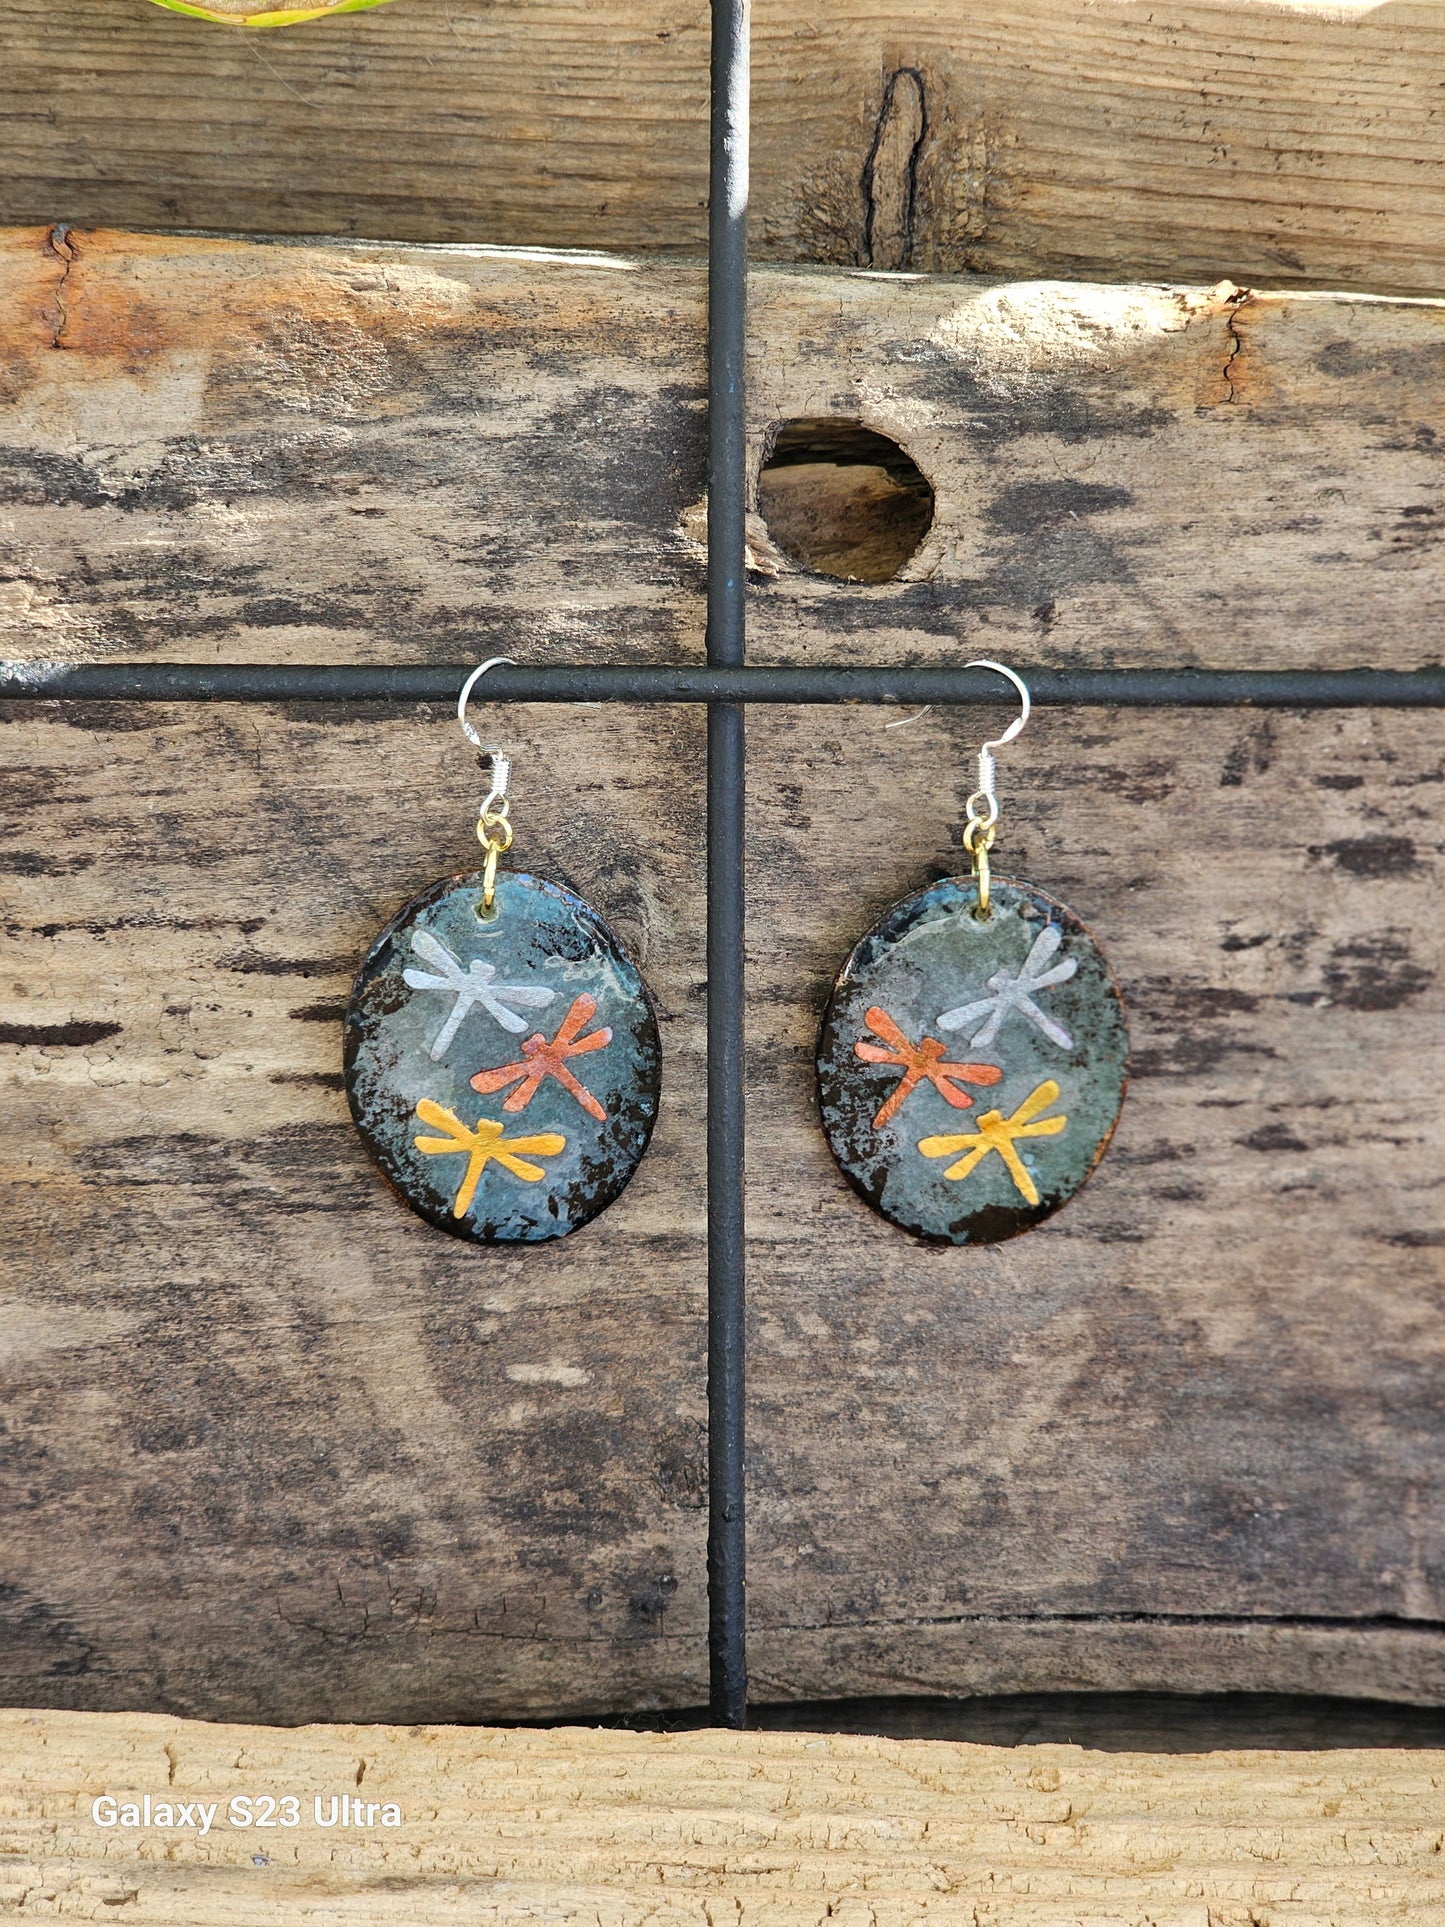 Hand painted Watercolor Mixed Media Collage Dragonfly Trinity. Ultra lightweight paper earrings. Grey blue patina background.  Layered collage with copper, silver and gold painted paper dragonflies.  Edged in dark brown patina. Back is painted in complimentary color. Oval in shape. Combination of14kg over sterling silver  and Sterling silver findings. Hangs 1 3/4" in Length